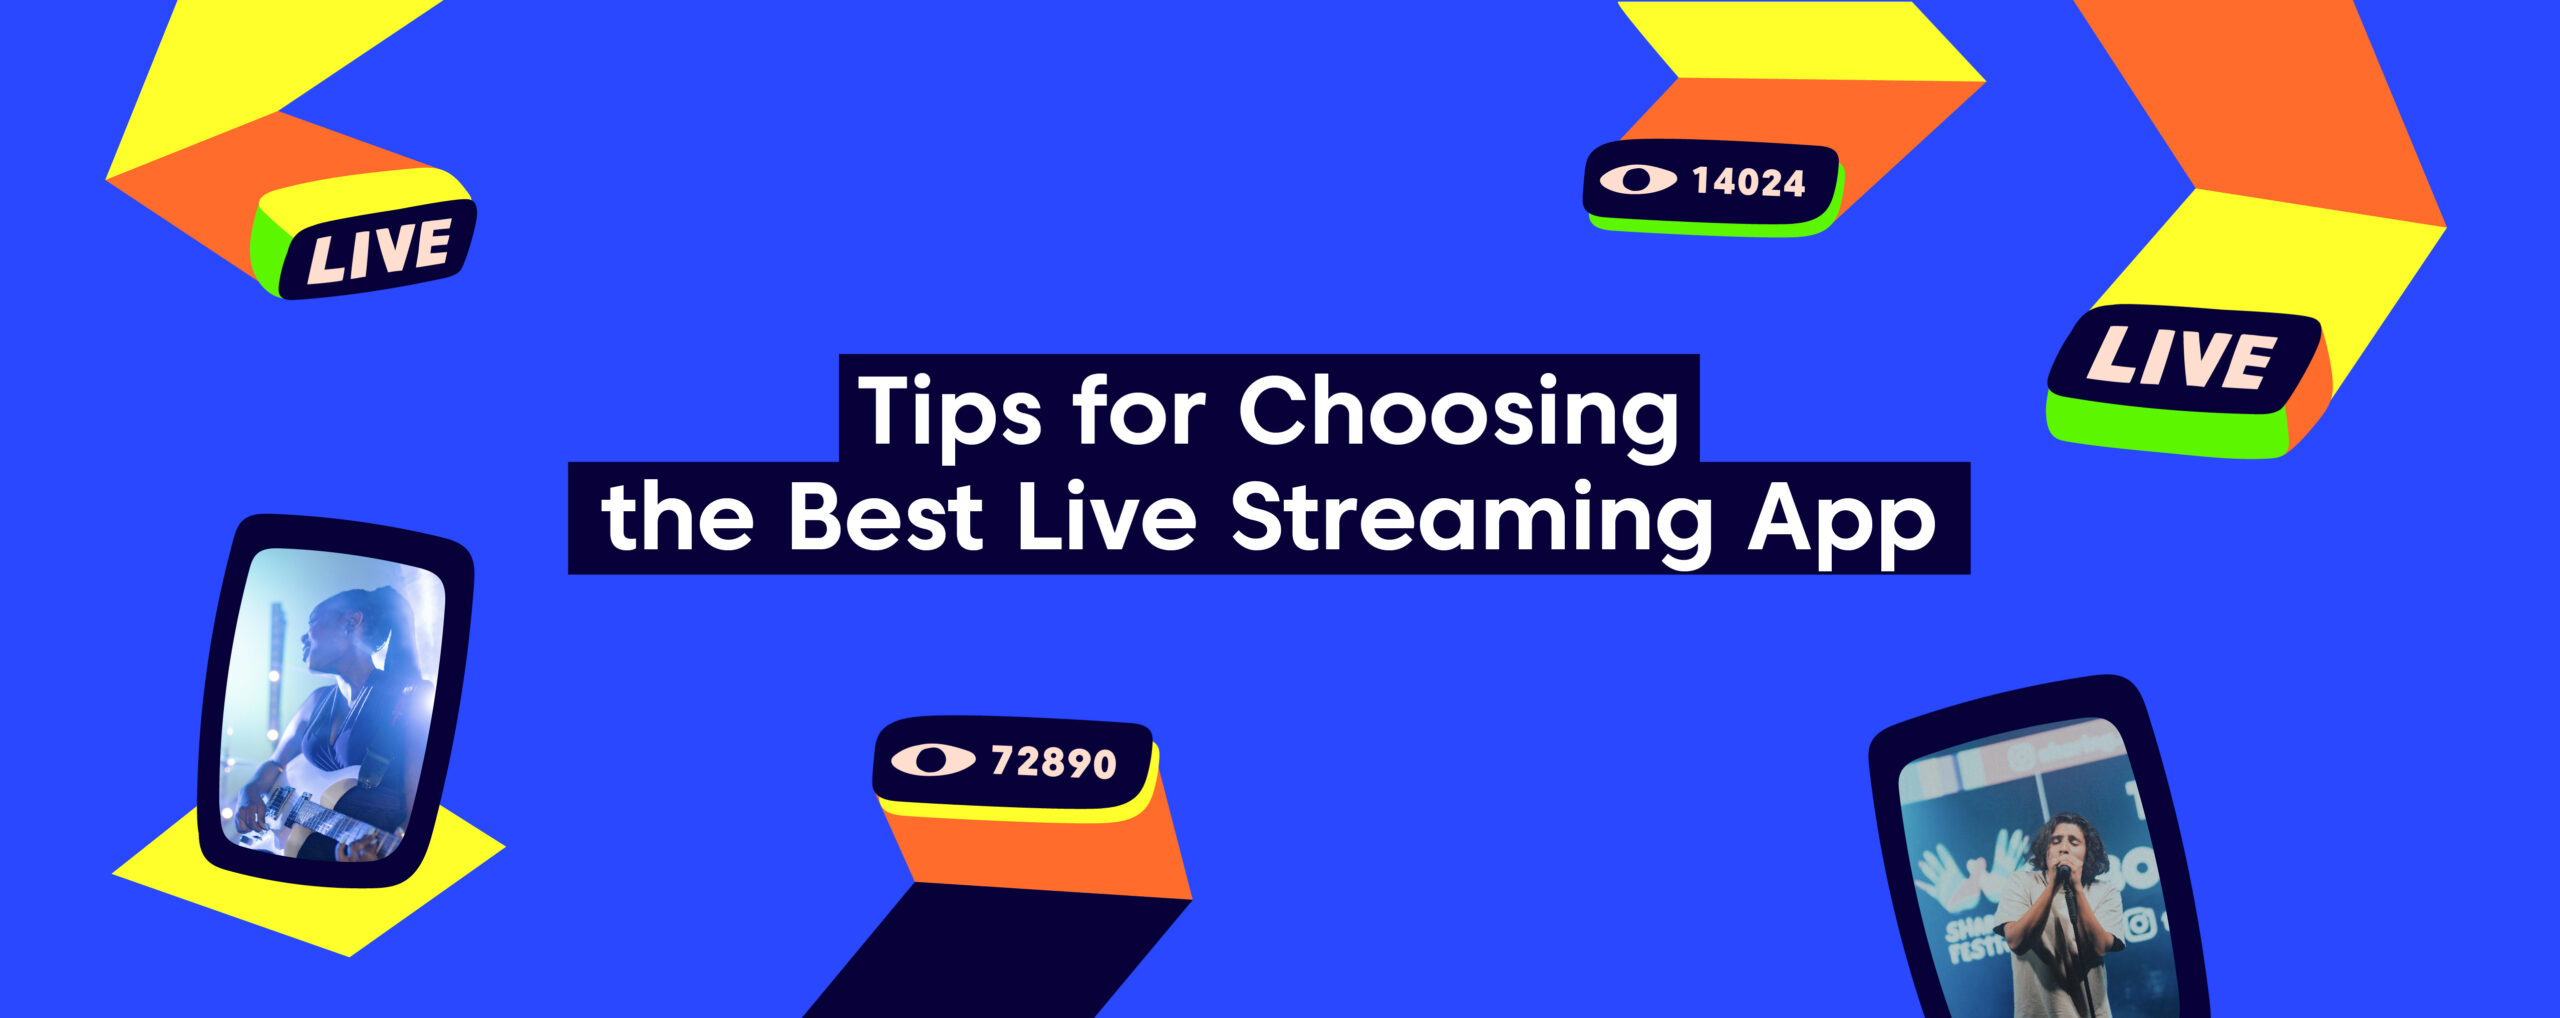 3 Tips for Choosing the Best Live Streaming App for Yourself